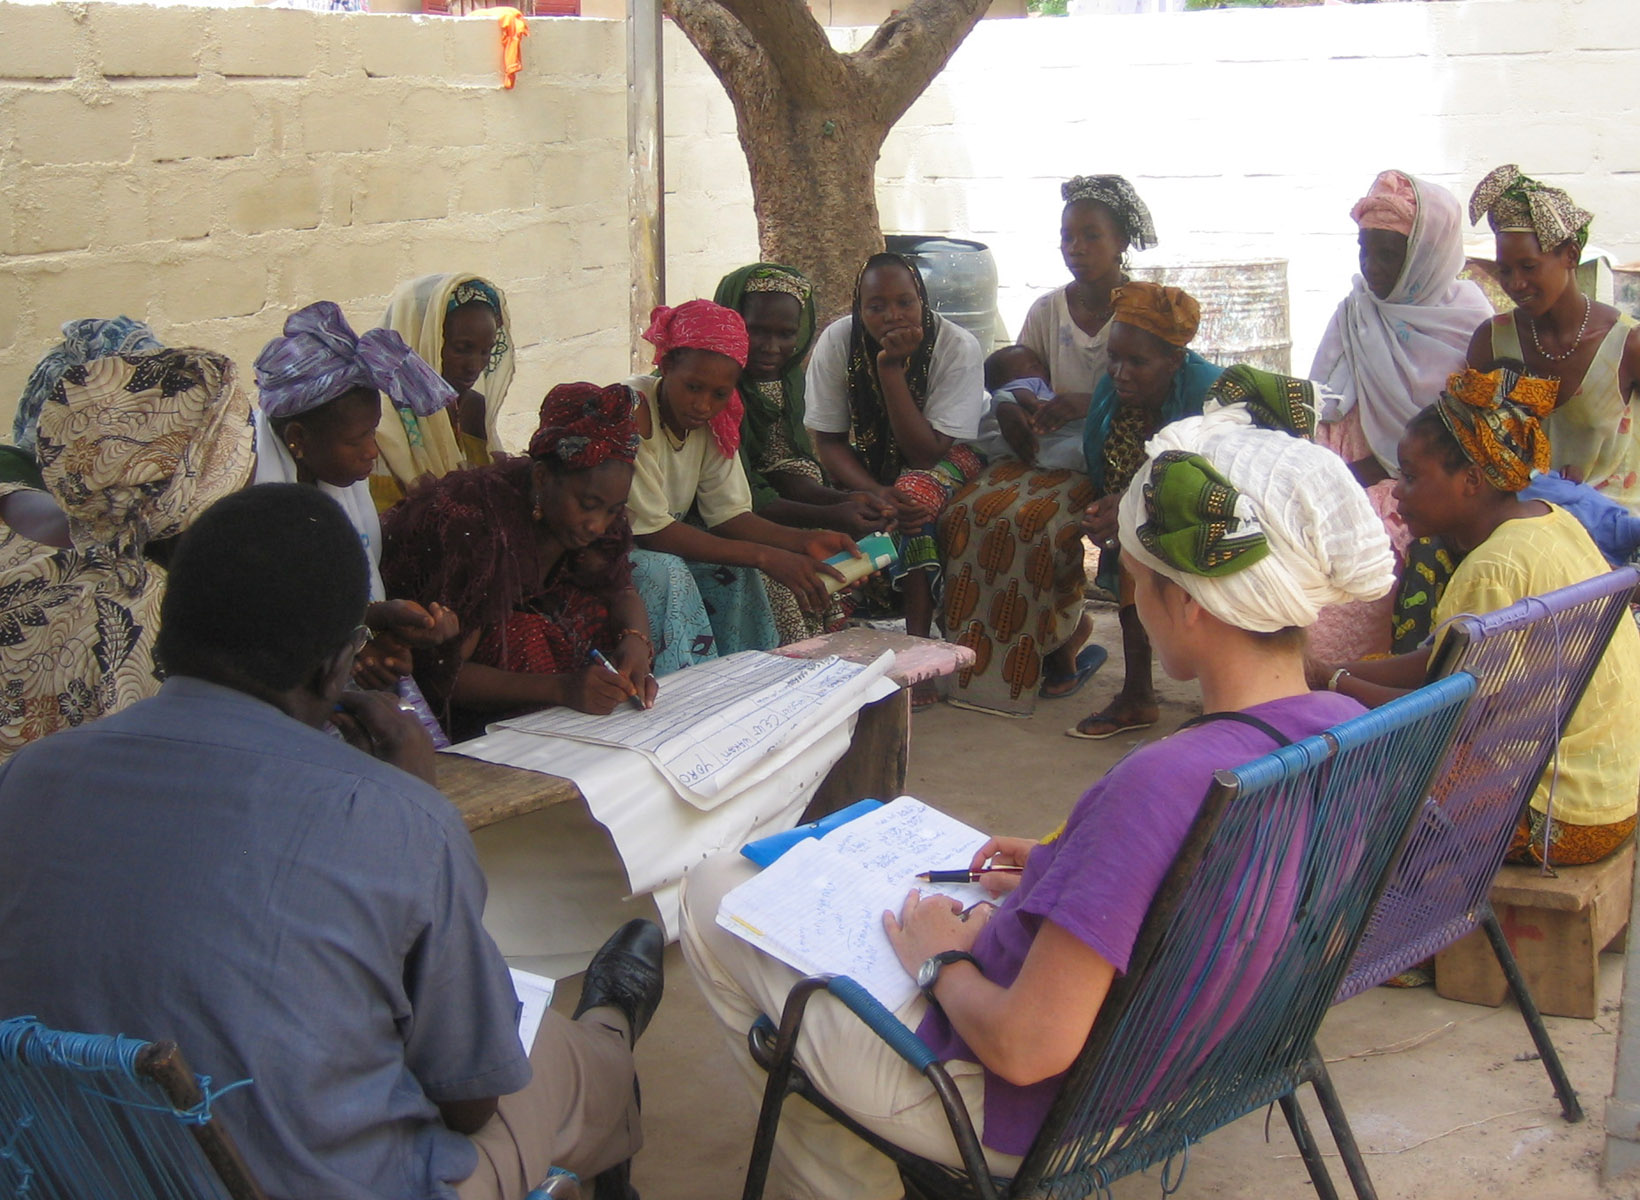 Workshop leader Maria Elisa Christie (right, foreground), observes while villagers conduct an activity profile.